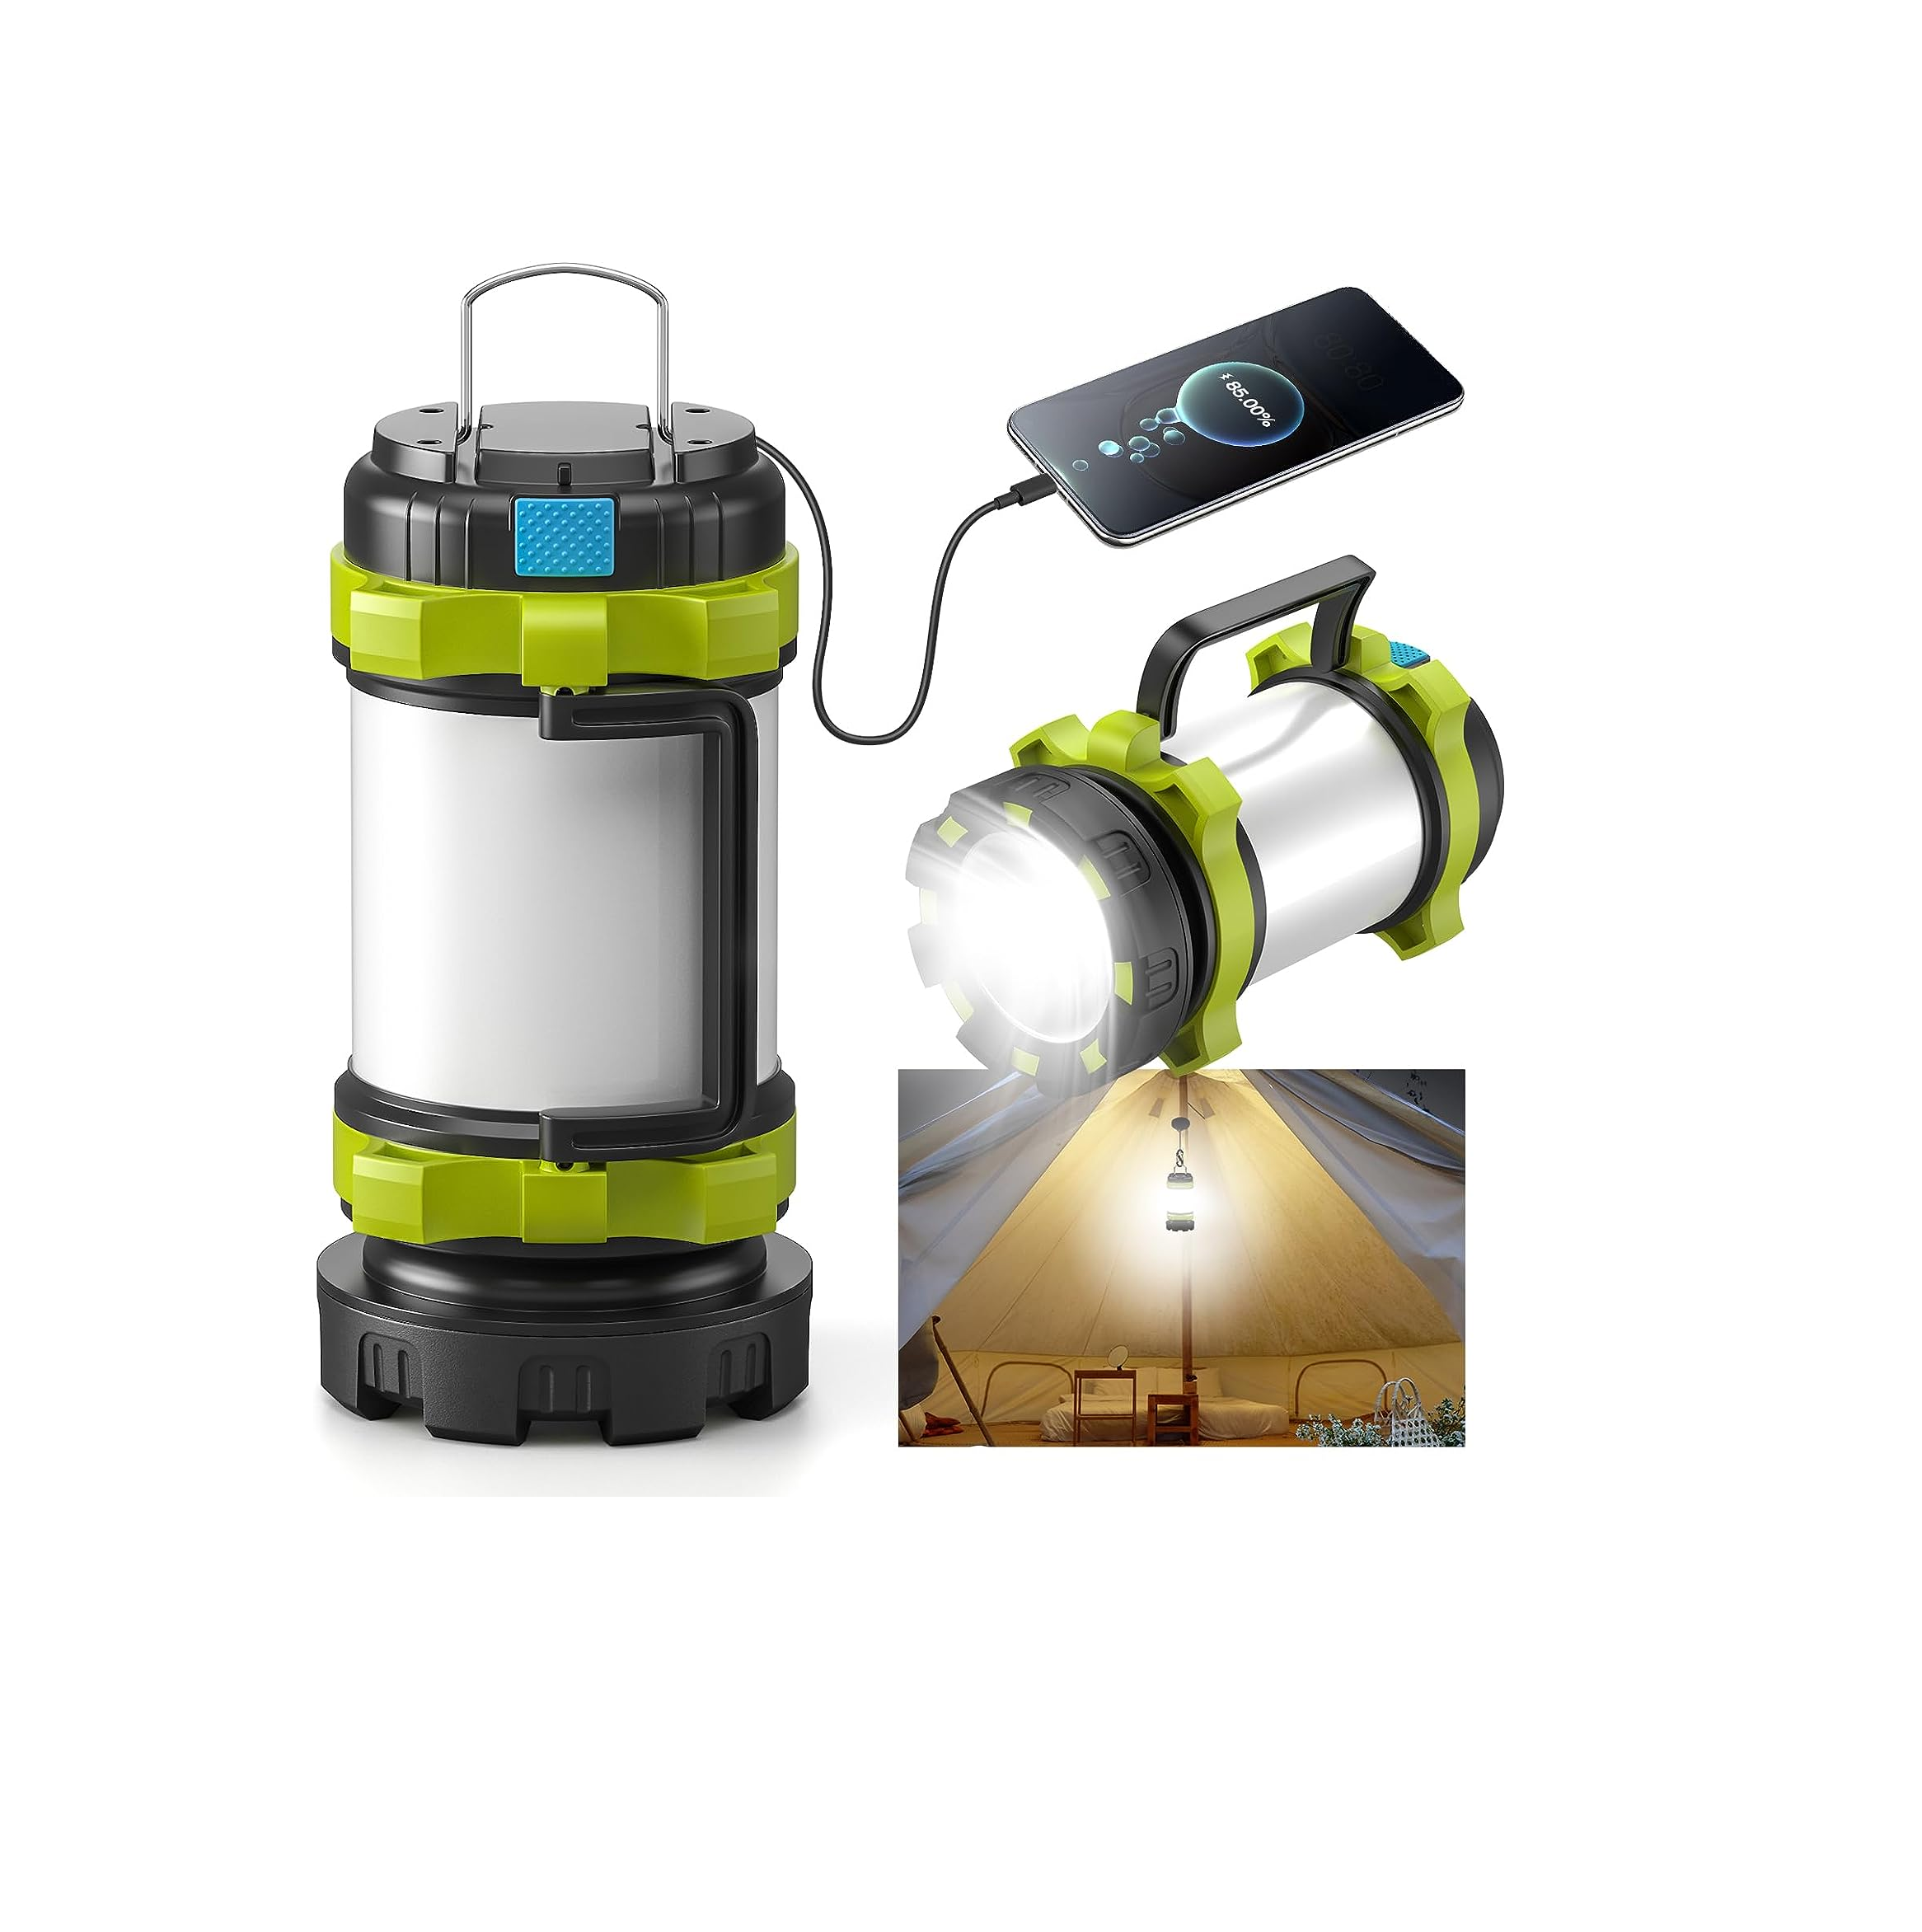 Mountaineering gear  Luxury camping  Lights & Lanterns  Lanterns  Hiking gear  Family camping  Fall gear  Extreme weather  Expert camping  EverLume 3000  Electric Lanterns  Durable camping  Couples camping  Comfortable camping  Camping gear  Camping & Hiking  Camp light  Budget camping  Beginner camping